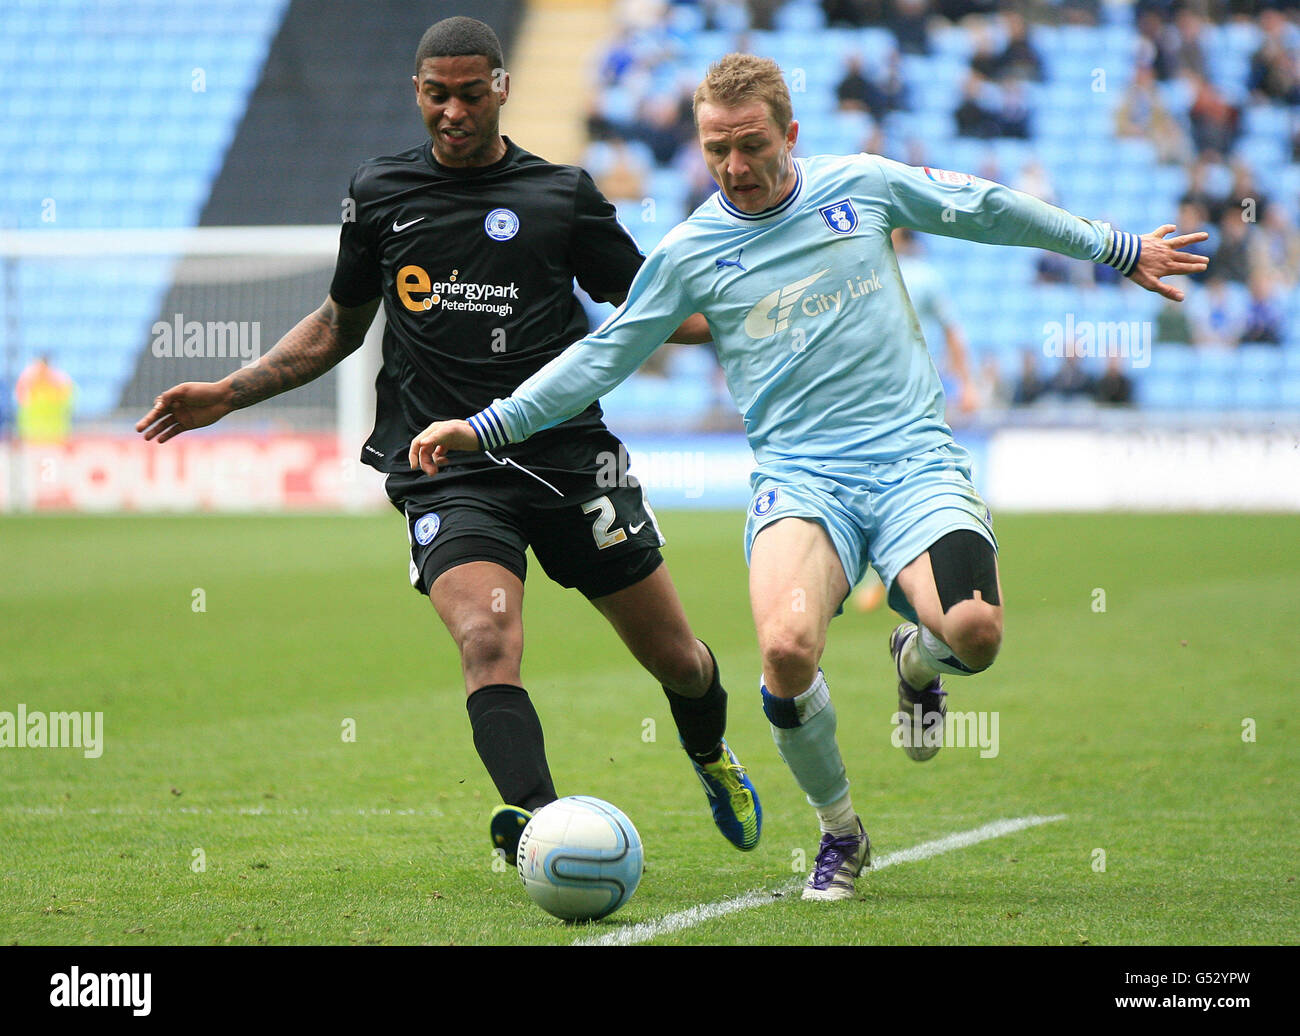 Coventry City's Gary McSheffrey and Peteborough United's Mark Little during the npower Football League Championship match at the Ricoh Arena, Coventry. PRESS ASSOCIATION Photo. Picture date: Saturday April 7, 2012. Photo credit should read:PA Wire. RESTRICTIONS. Maximum 45 images during a match. No video emulation or promotion as 'live'. No use in games, competitions, merchandise, betting or single club/player services. No use with unofficial audio, video, data, fixtures or club/league logos. Stock Photo